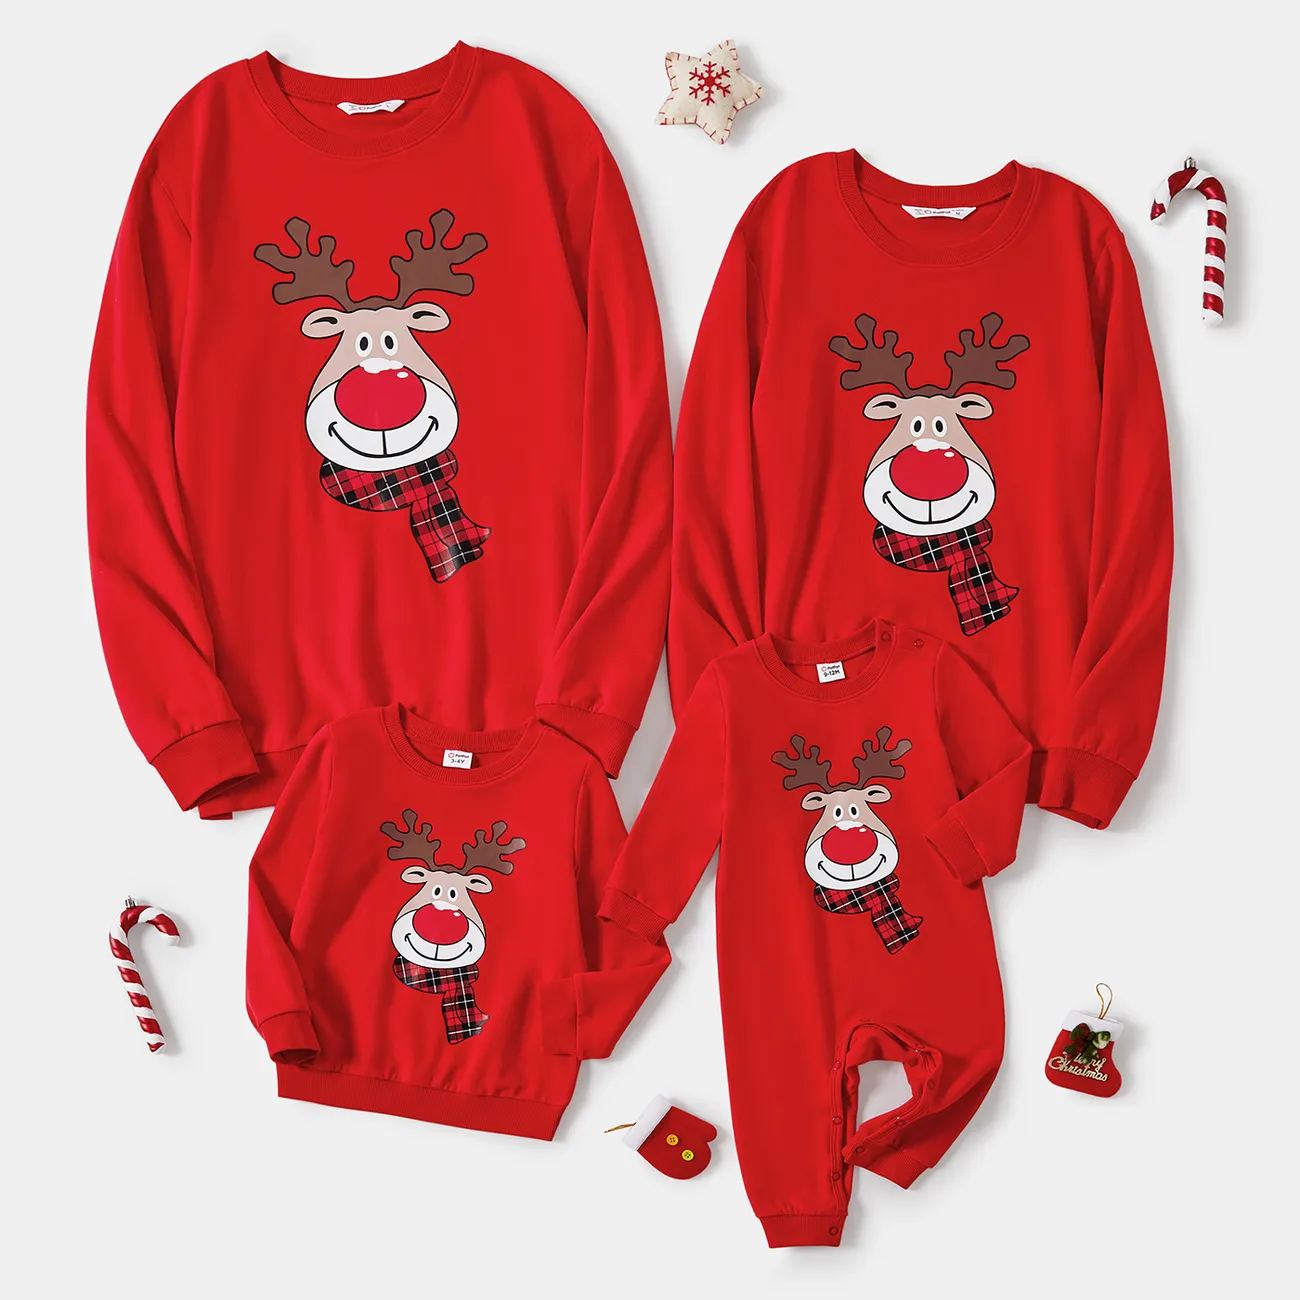 Christmas Family Matching Reindeer Print Red Tops Red big image 1